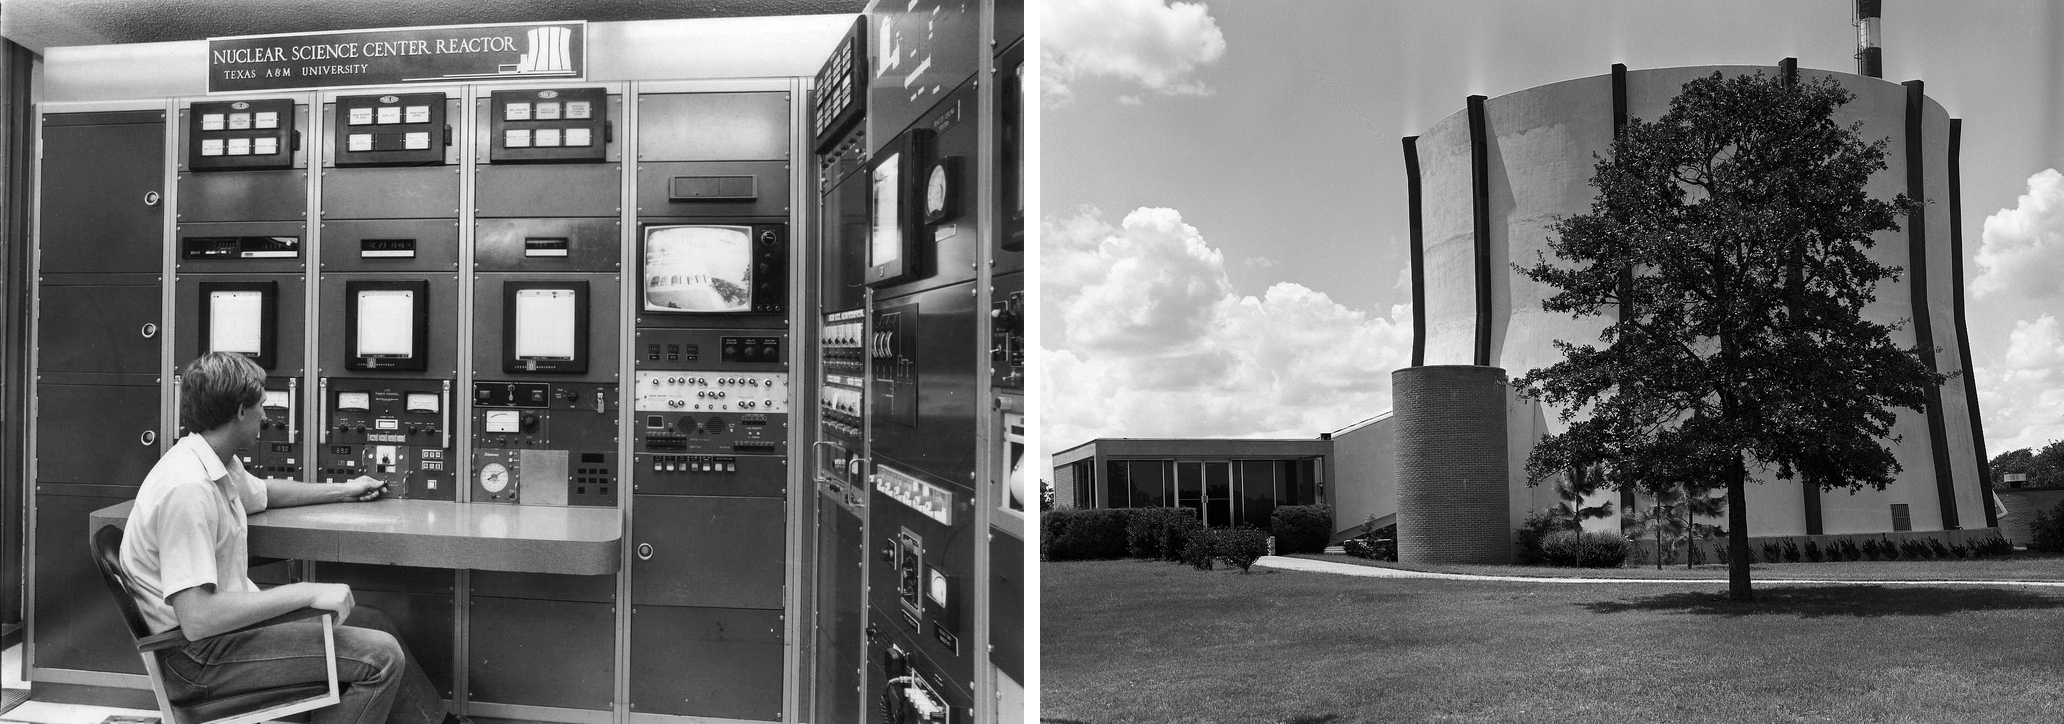 Two photos. The first photo features a man sitting in a chair as he works at the Nuclear Science Reactor in front of a wall covered in several screens and knobs. The second photo is of the Nuclear Science Center in 1968.